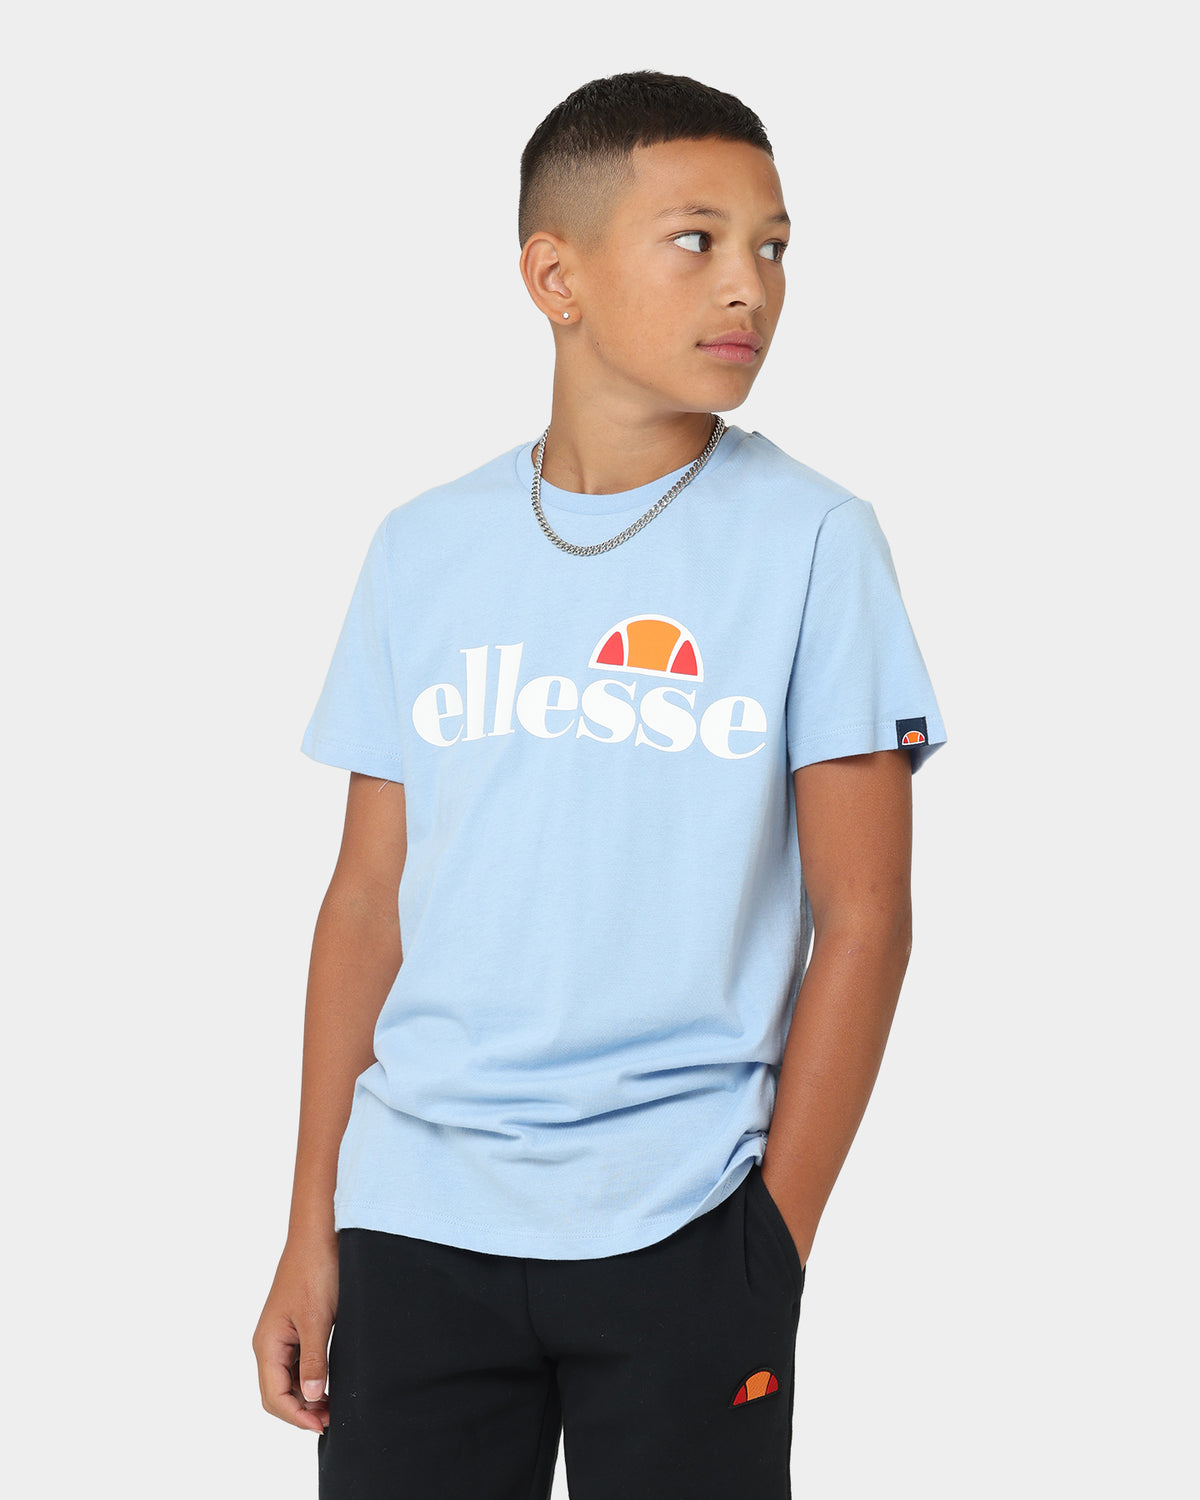 SAVE BIG on Ellesse Get top T-Shirt affordable service Kids\' the products and prices ELLESSE at Blue Malia . Light